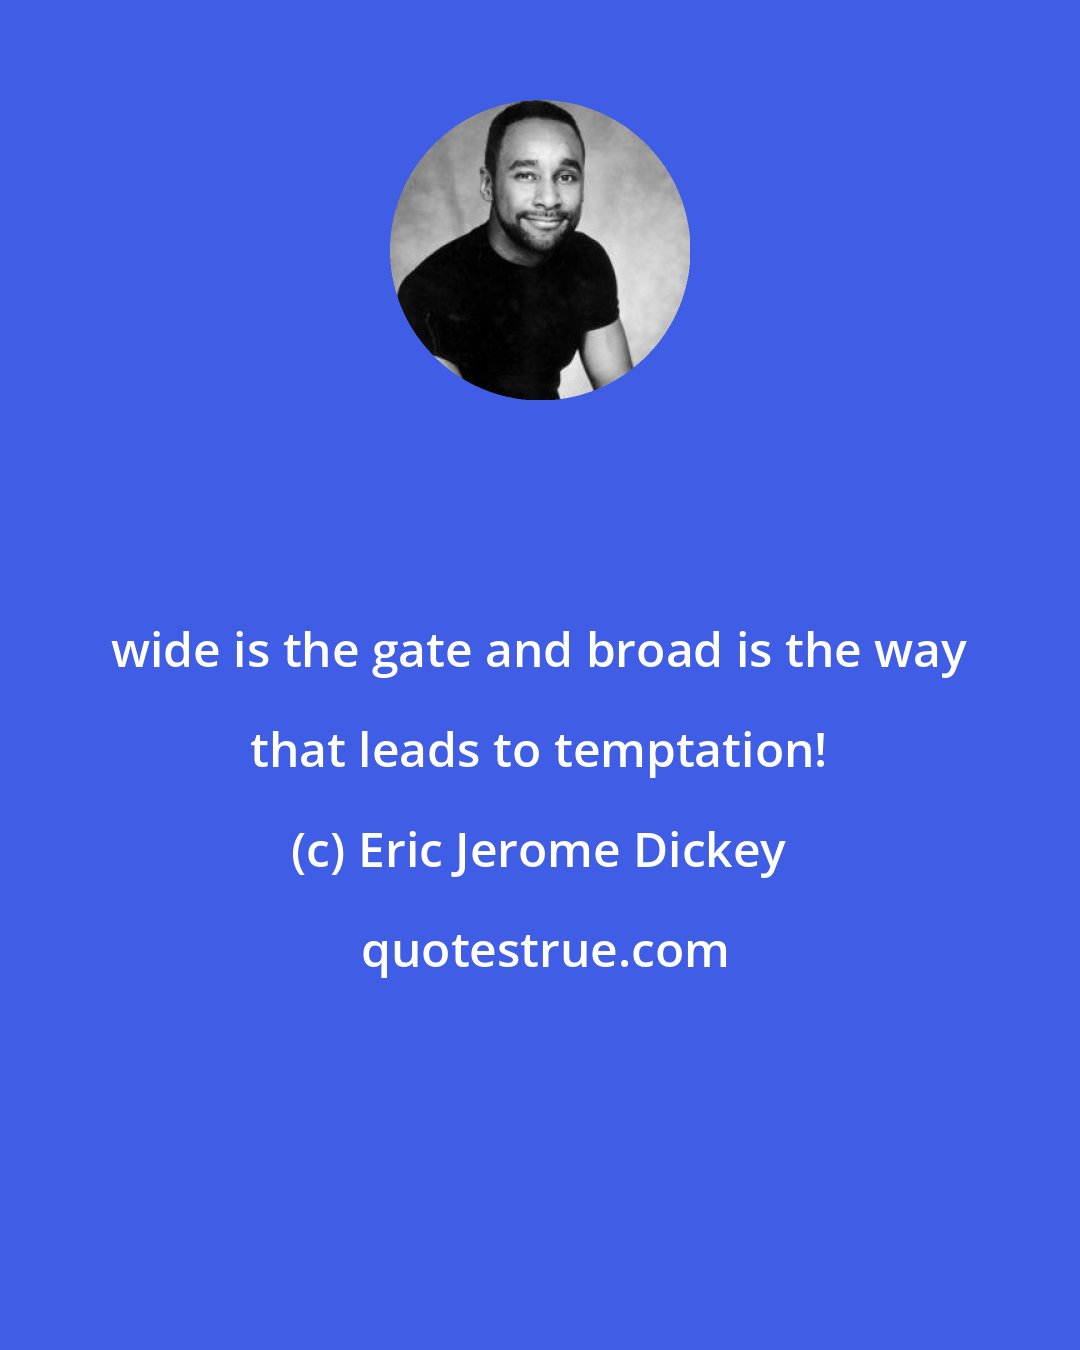 Eric Jerome Dickey: wide is the gate and broad is the way that leads to temptation!